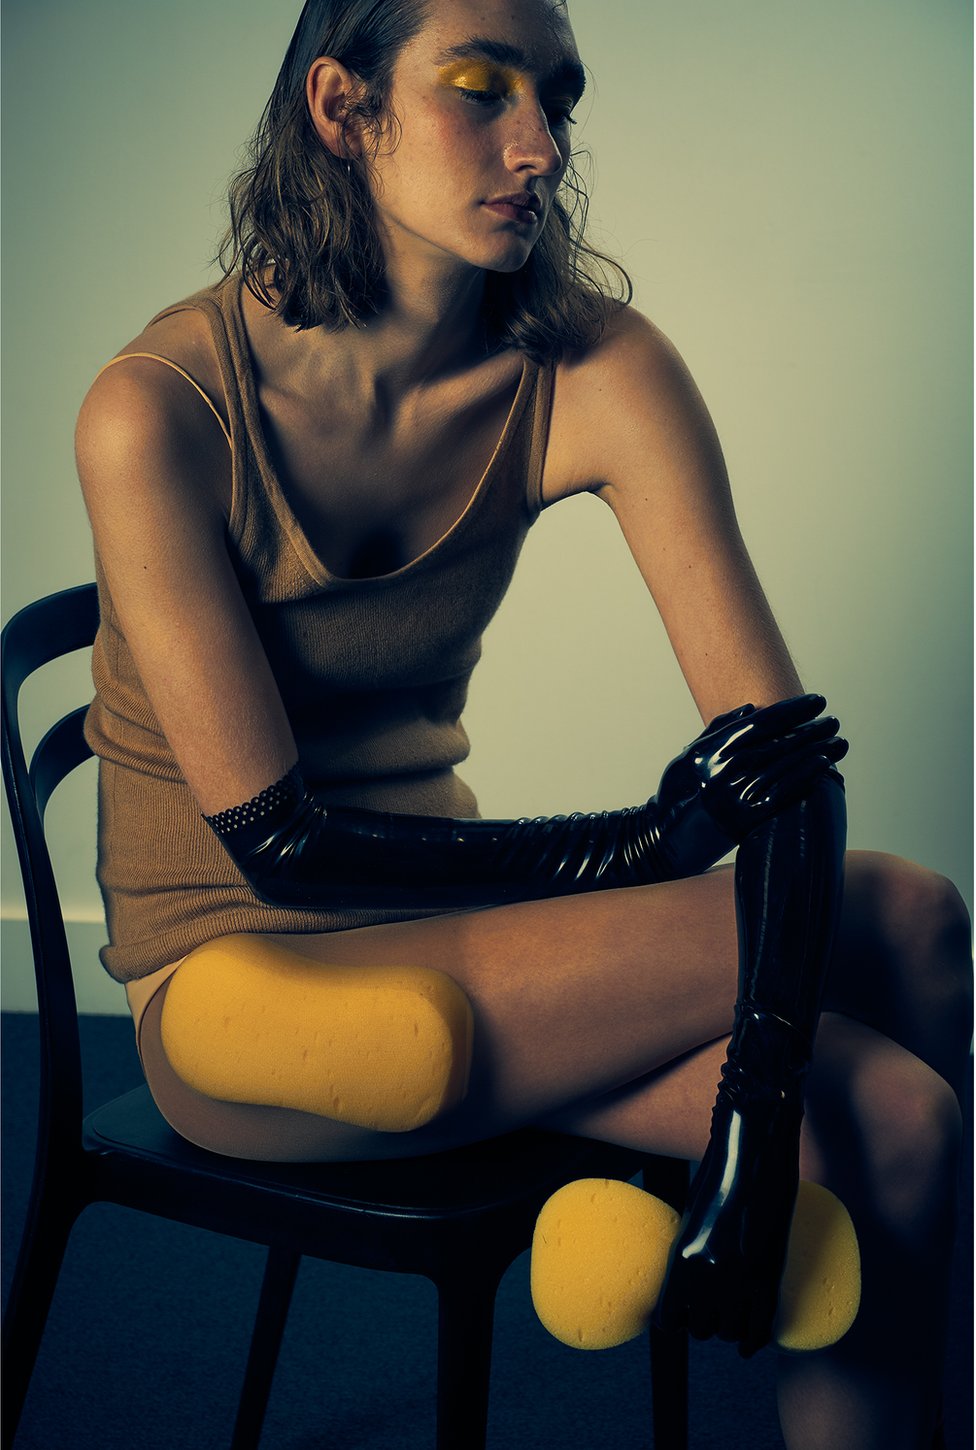 A model sits on a chair with a sponge clutched in her hand and one attached to her thigh